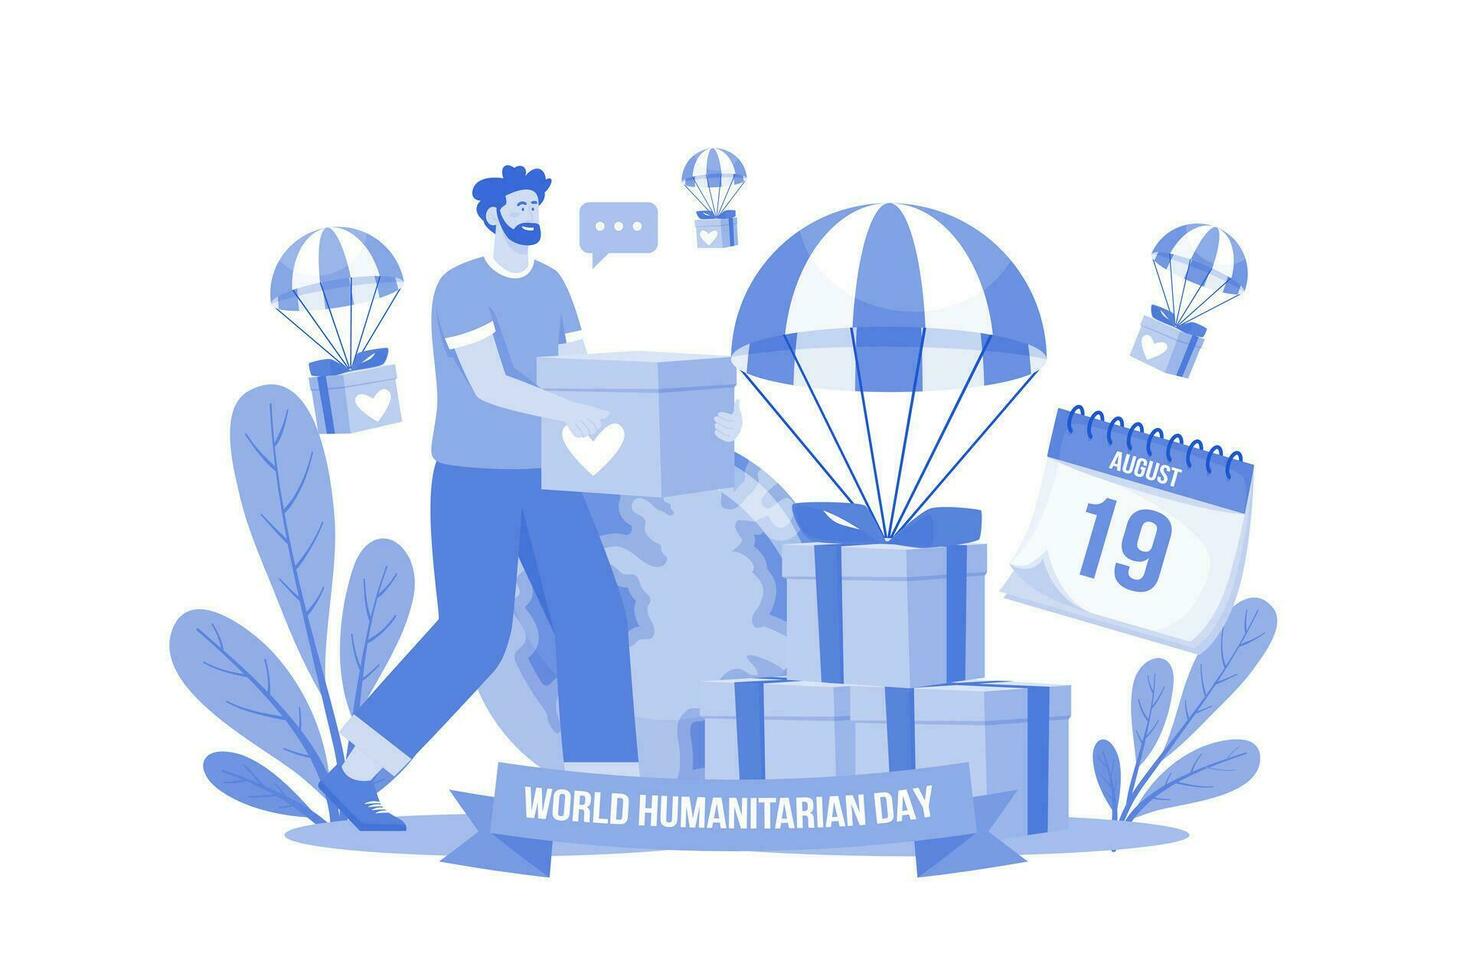 World Humanitarian Day Illustration concept on white background vector